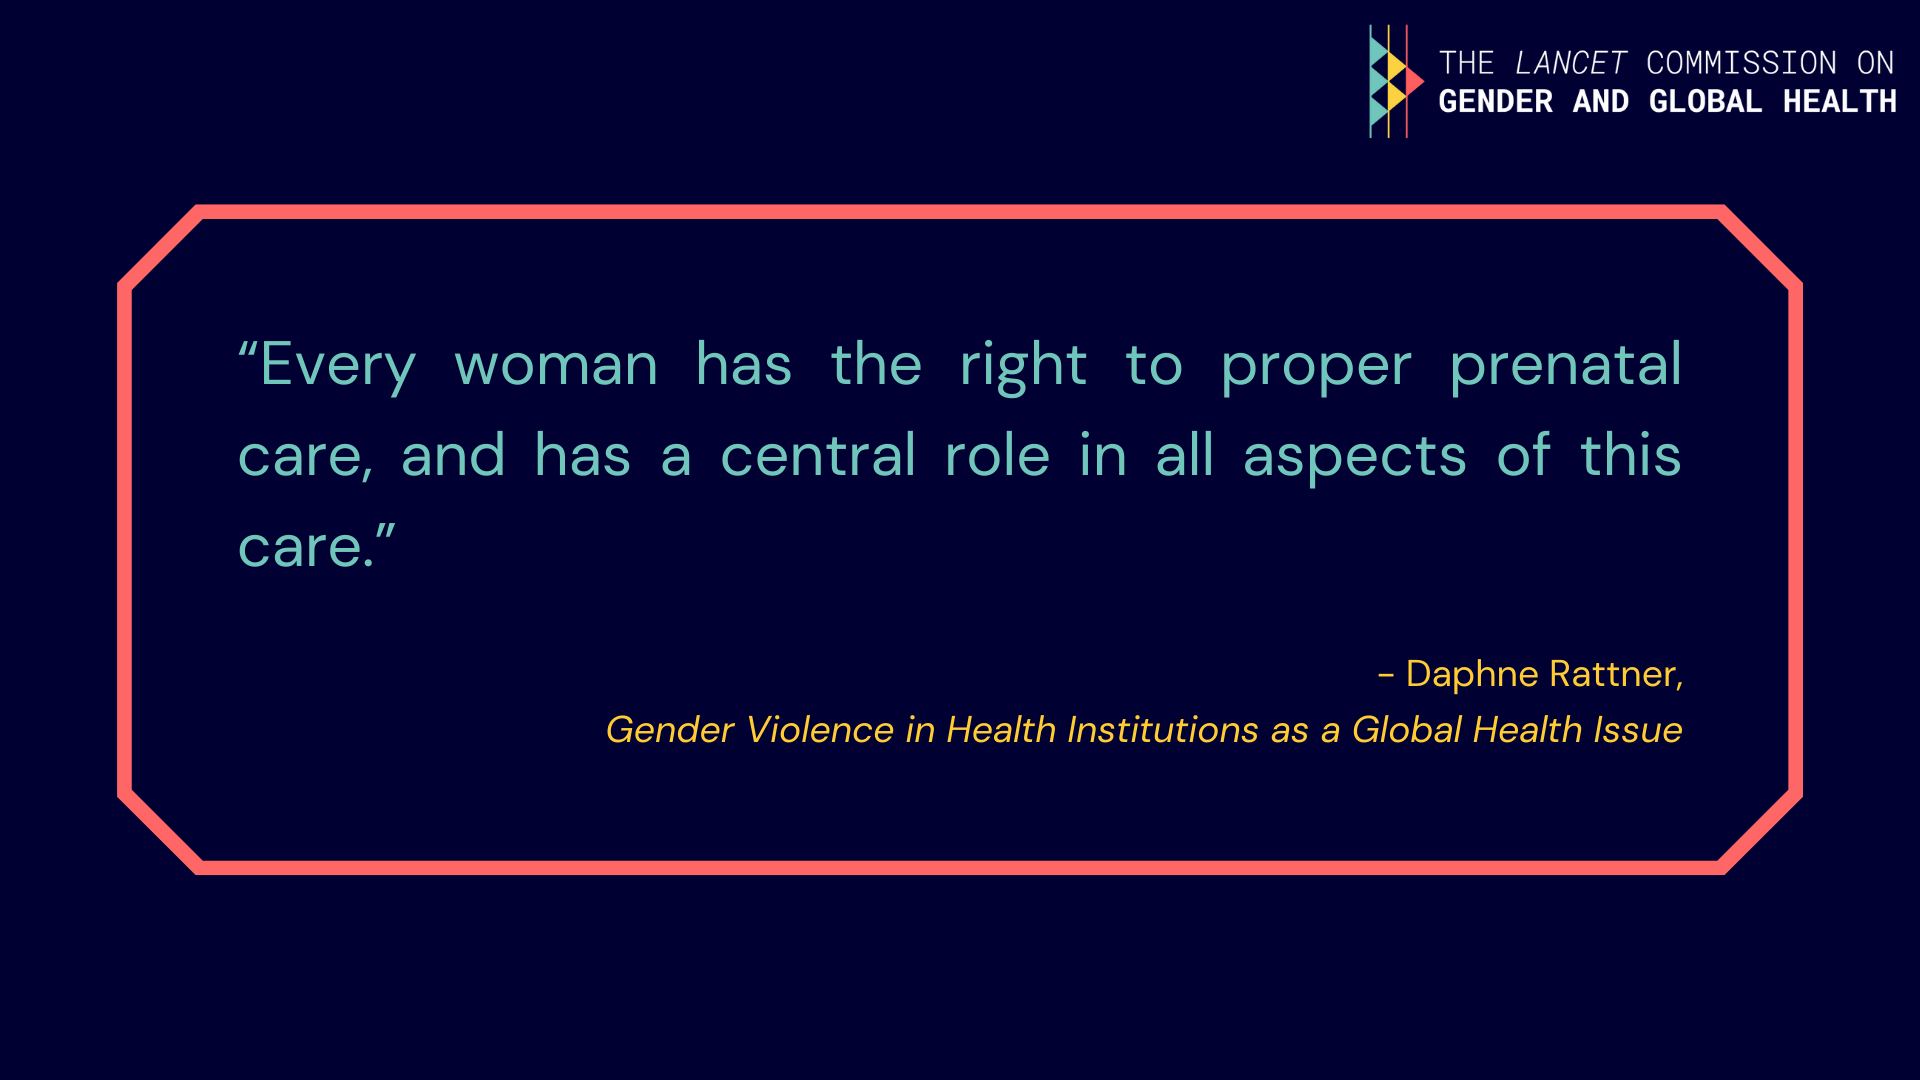 Quote from Daphne Rattner: "Every women has the right to proper prenatal care, and has a central role in all aspects of this care".